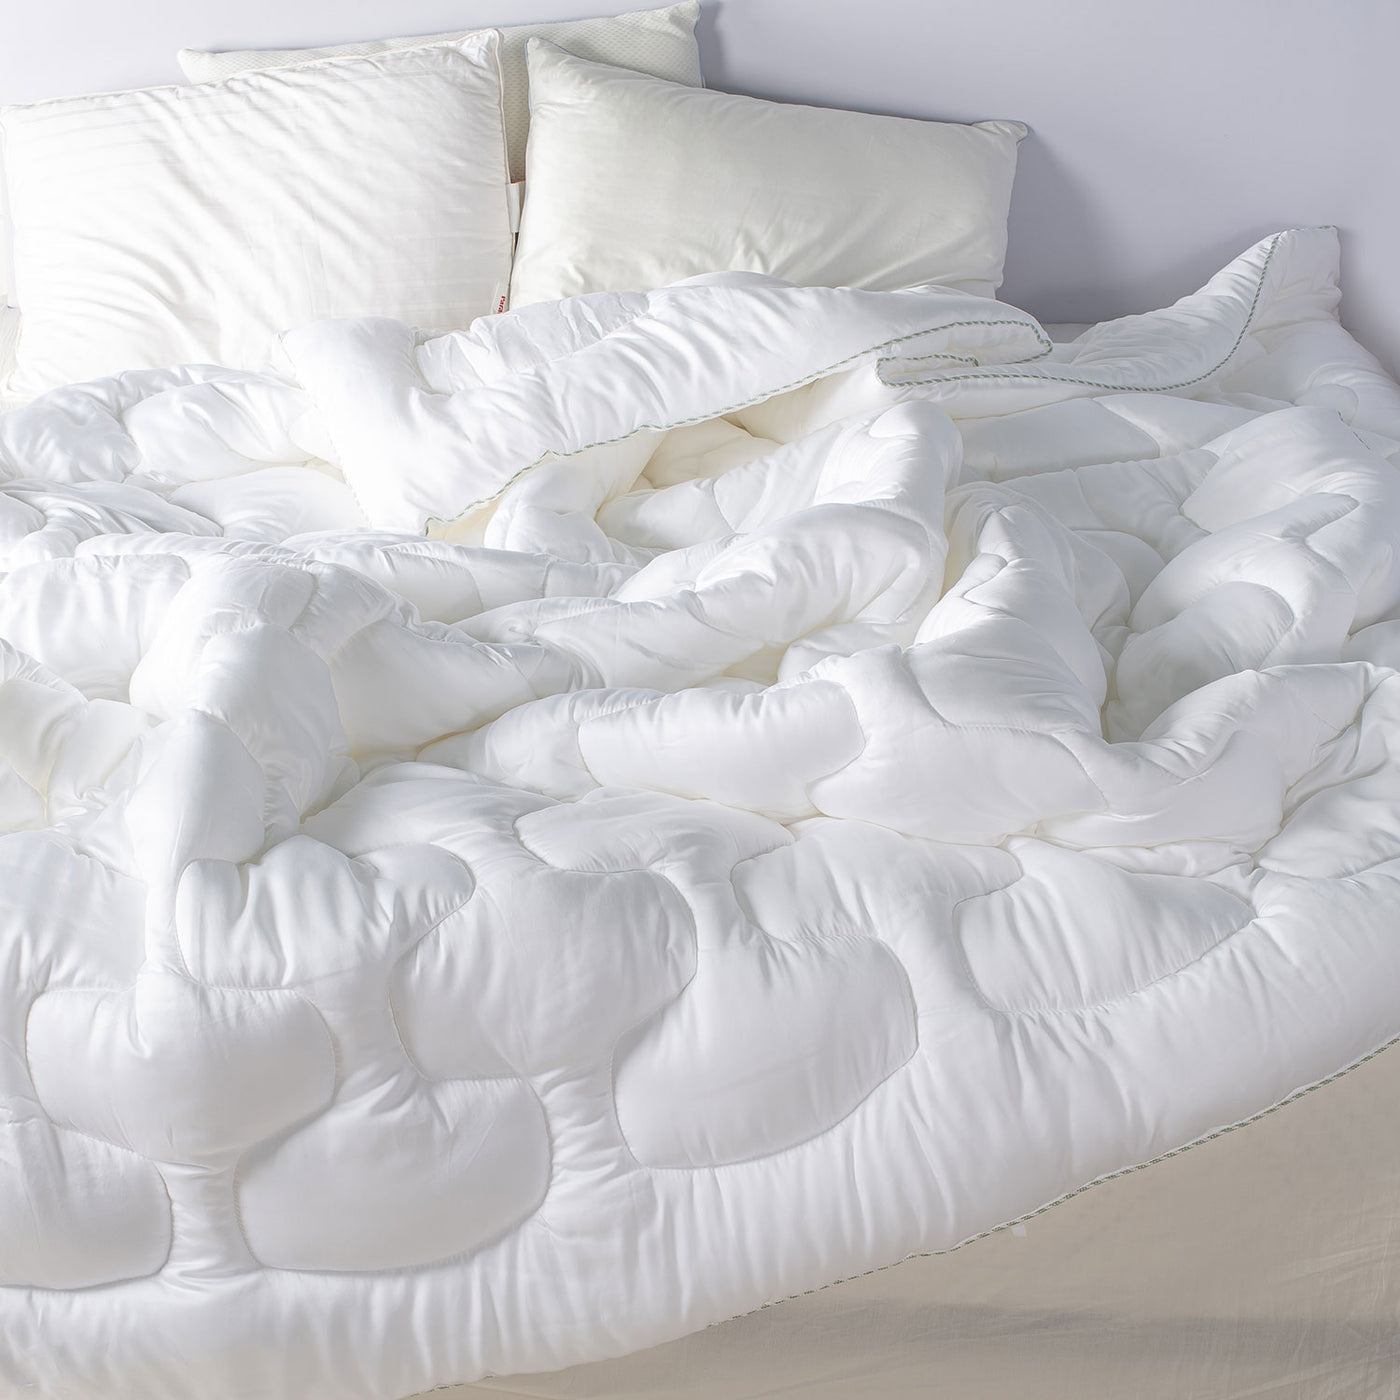 Lightweight Extreme Winter Quilt made from extracts of Natural Wood - TENCEL™ ( Certified by a Swiss laboratory)